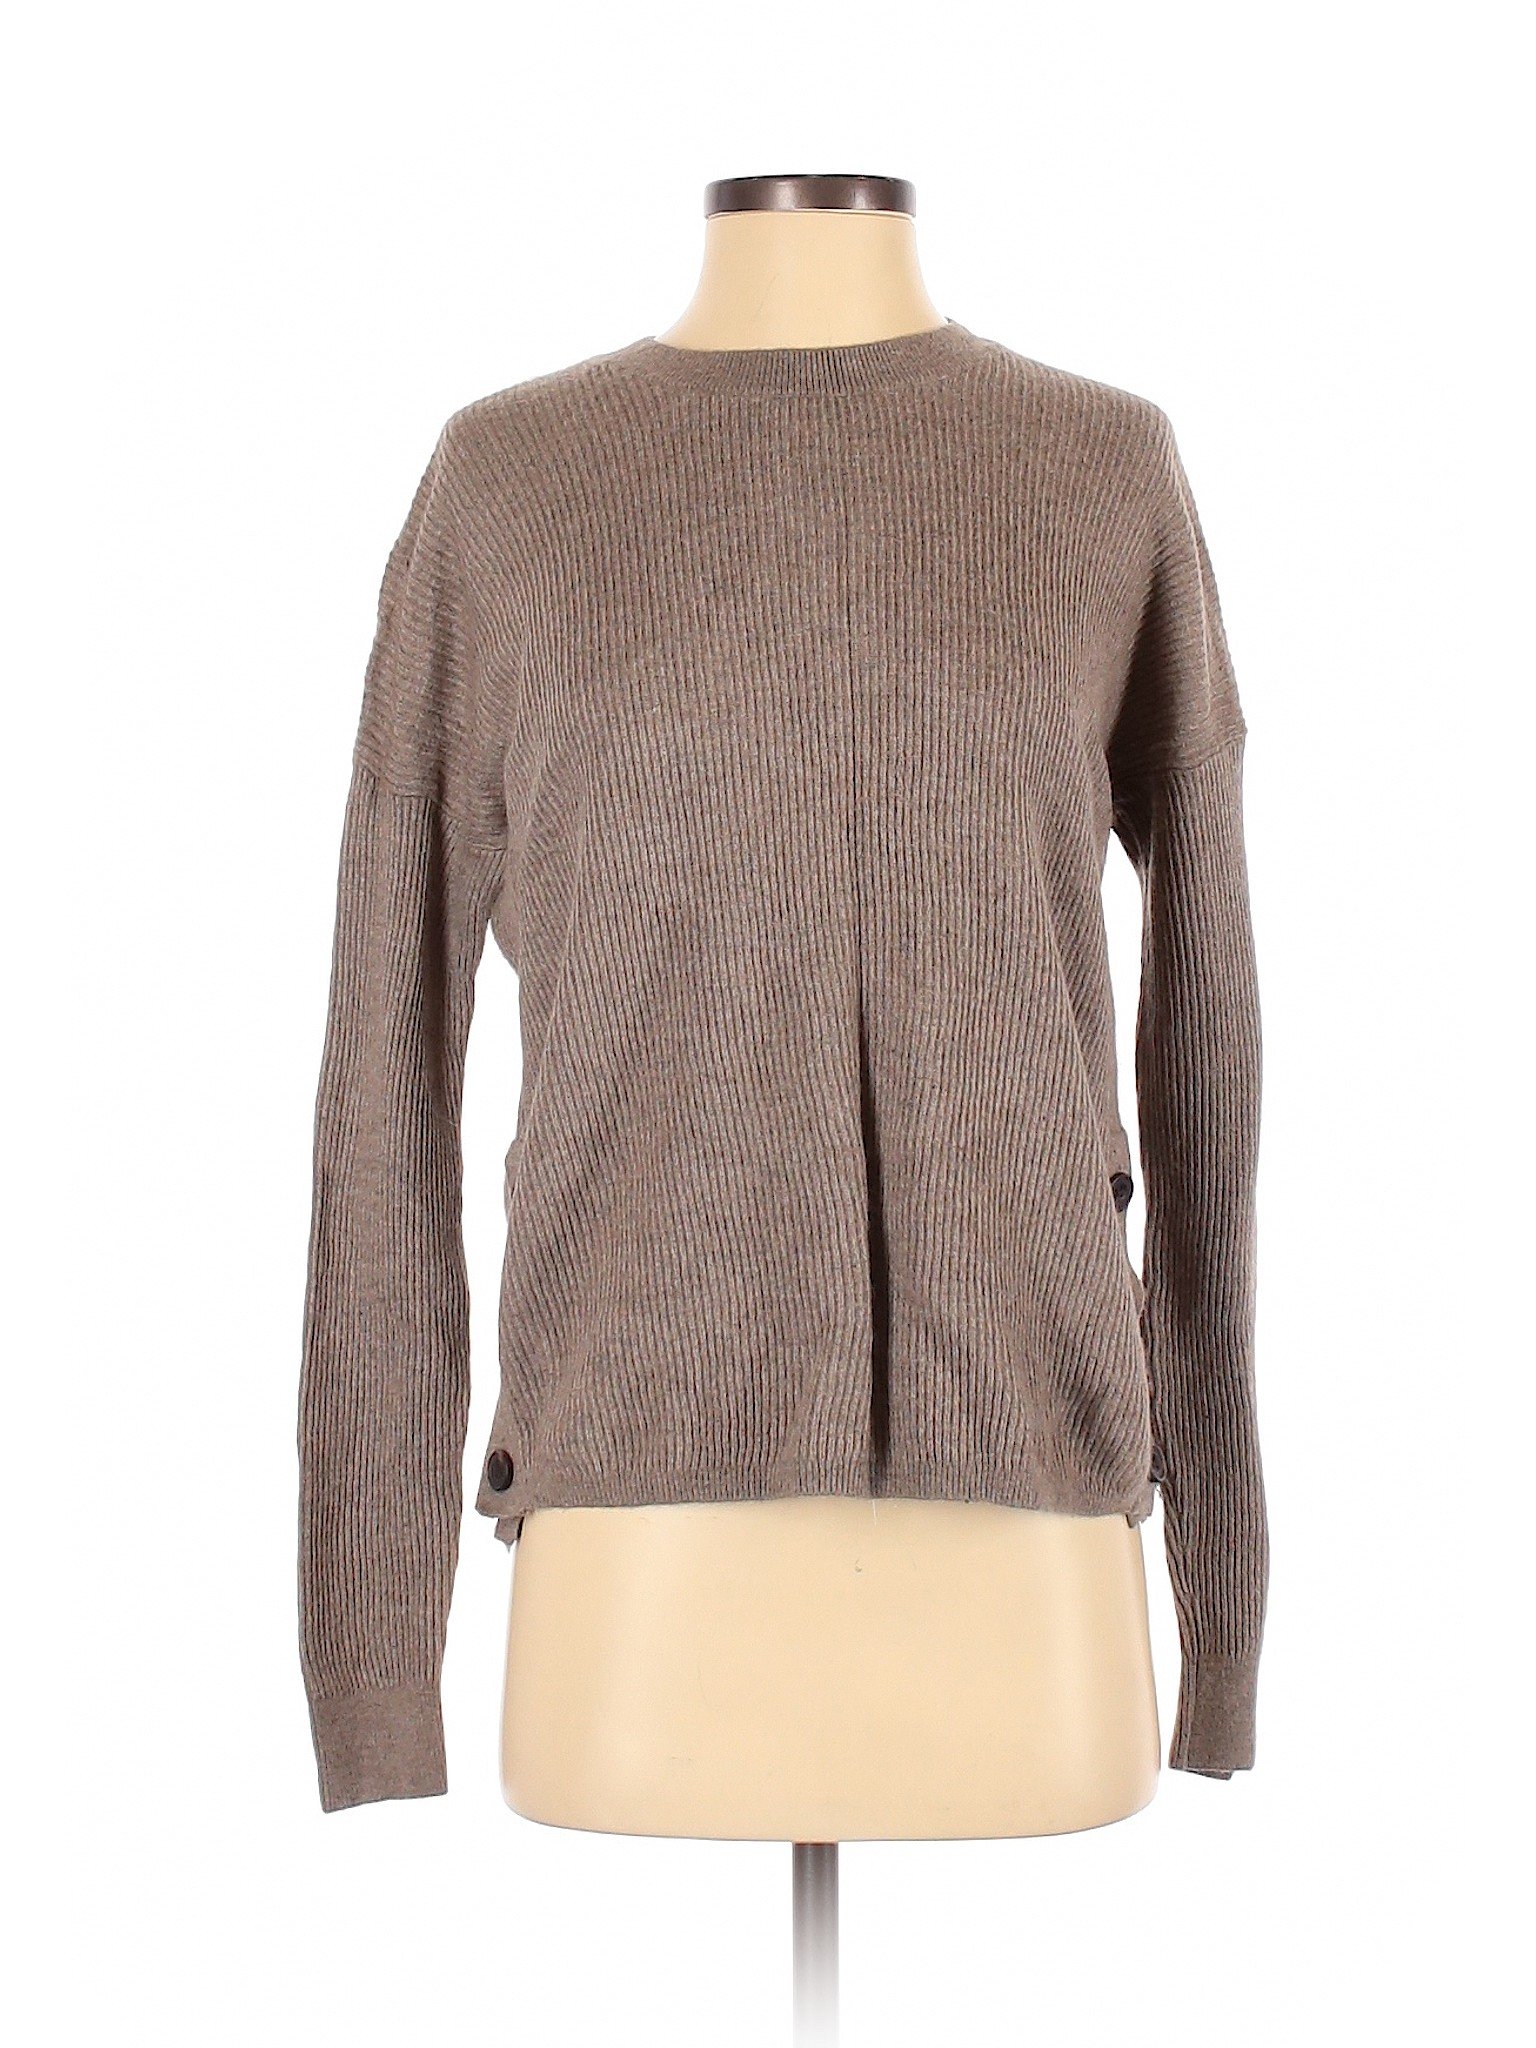 Abercrombie & Fitch Women Brown Pullover Sweater XS | eBay